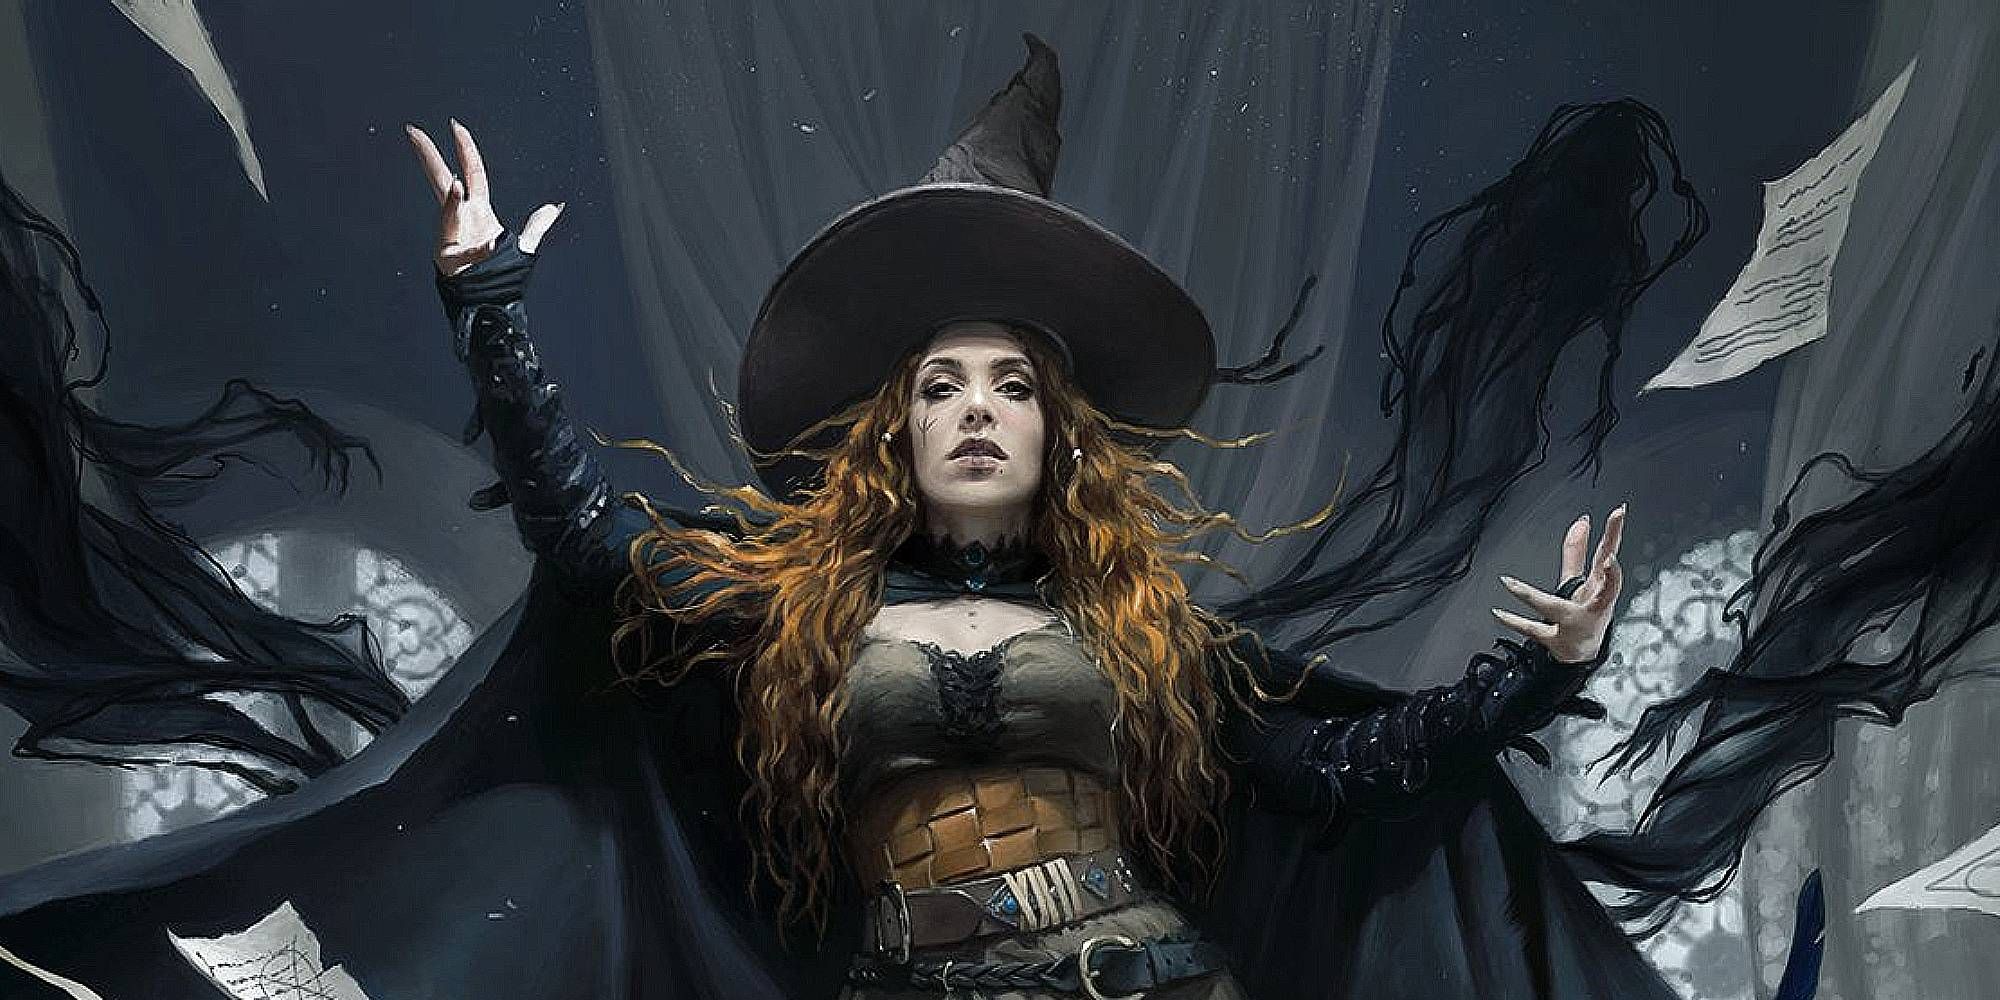 A pale woman dressed in witch's attire (pointy hat, dark robes) poses as shadowy magic emanates from her